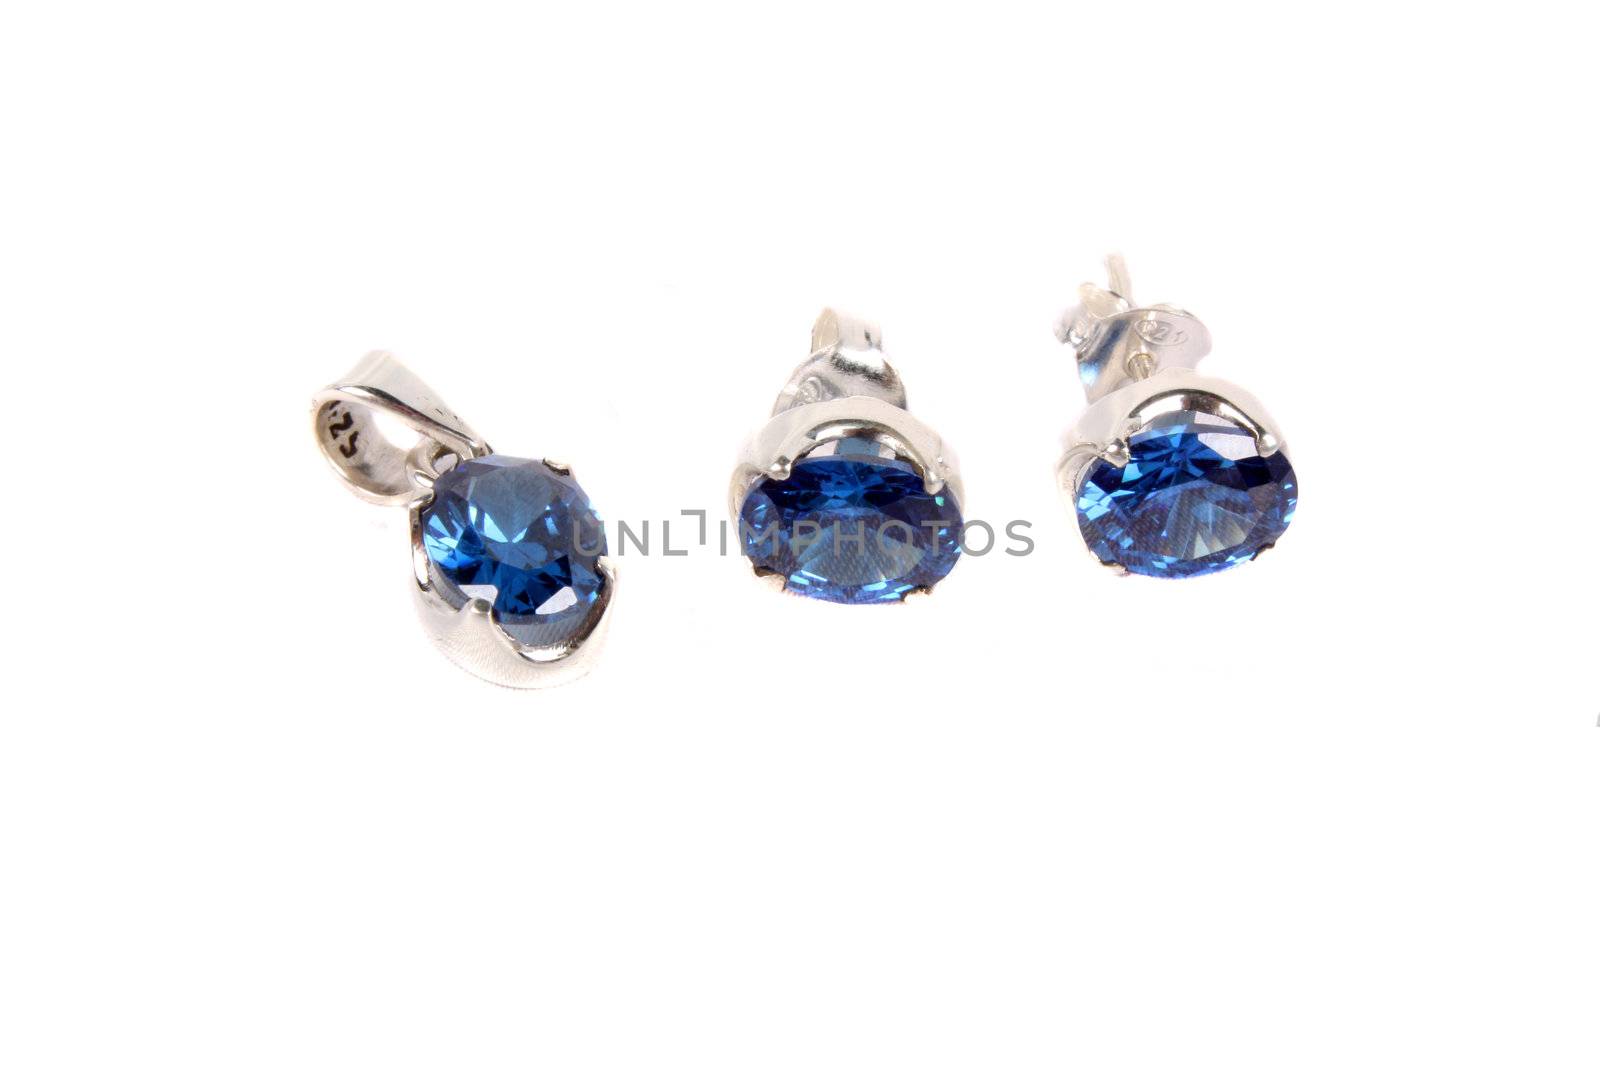 A set of silver jewelery with pendant and earrings made with precious blue gemstones, on white studio background.